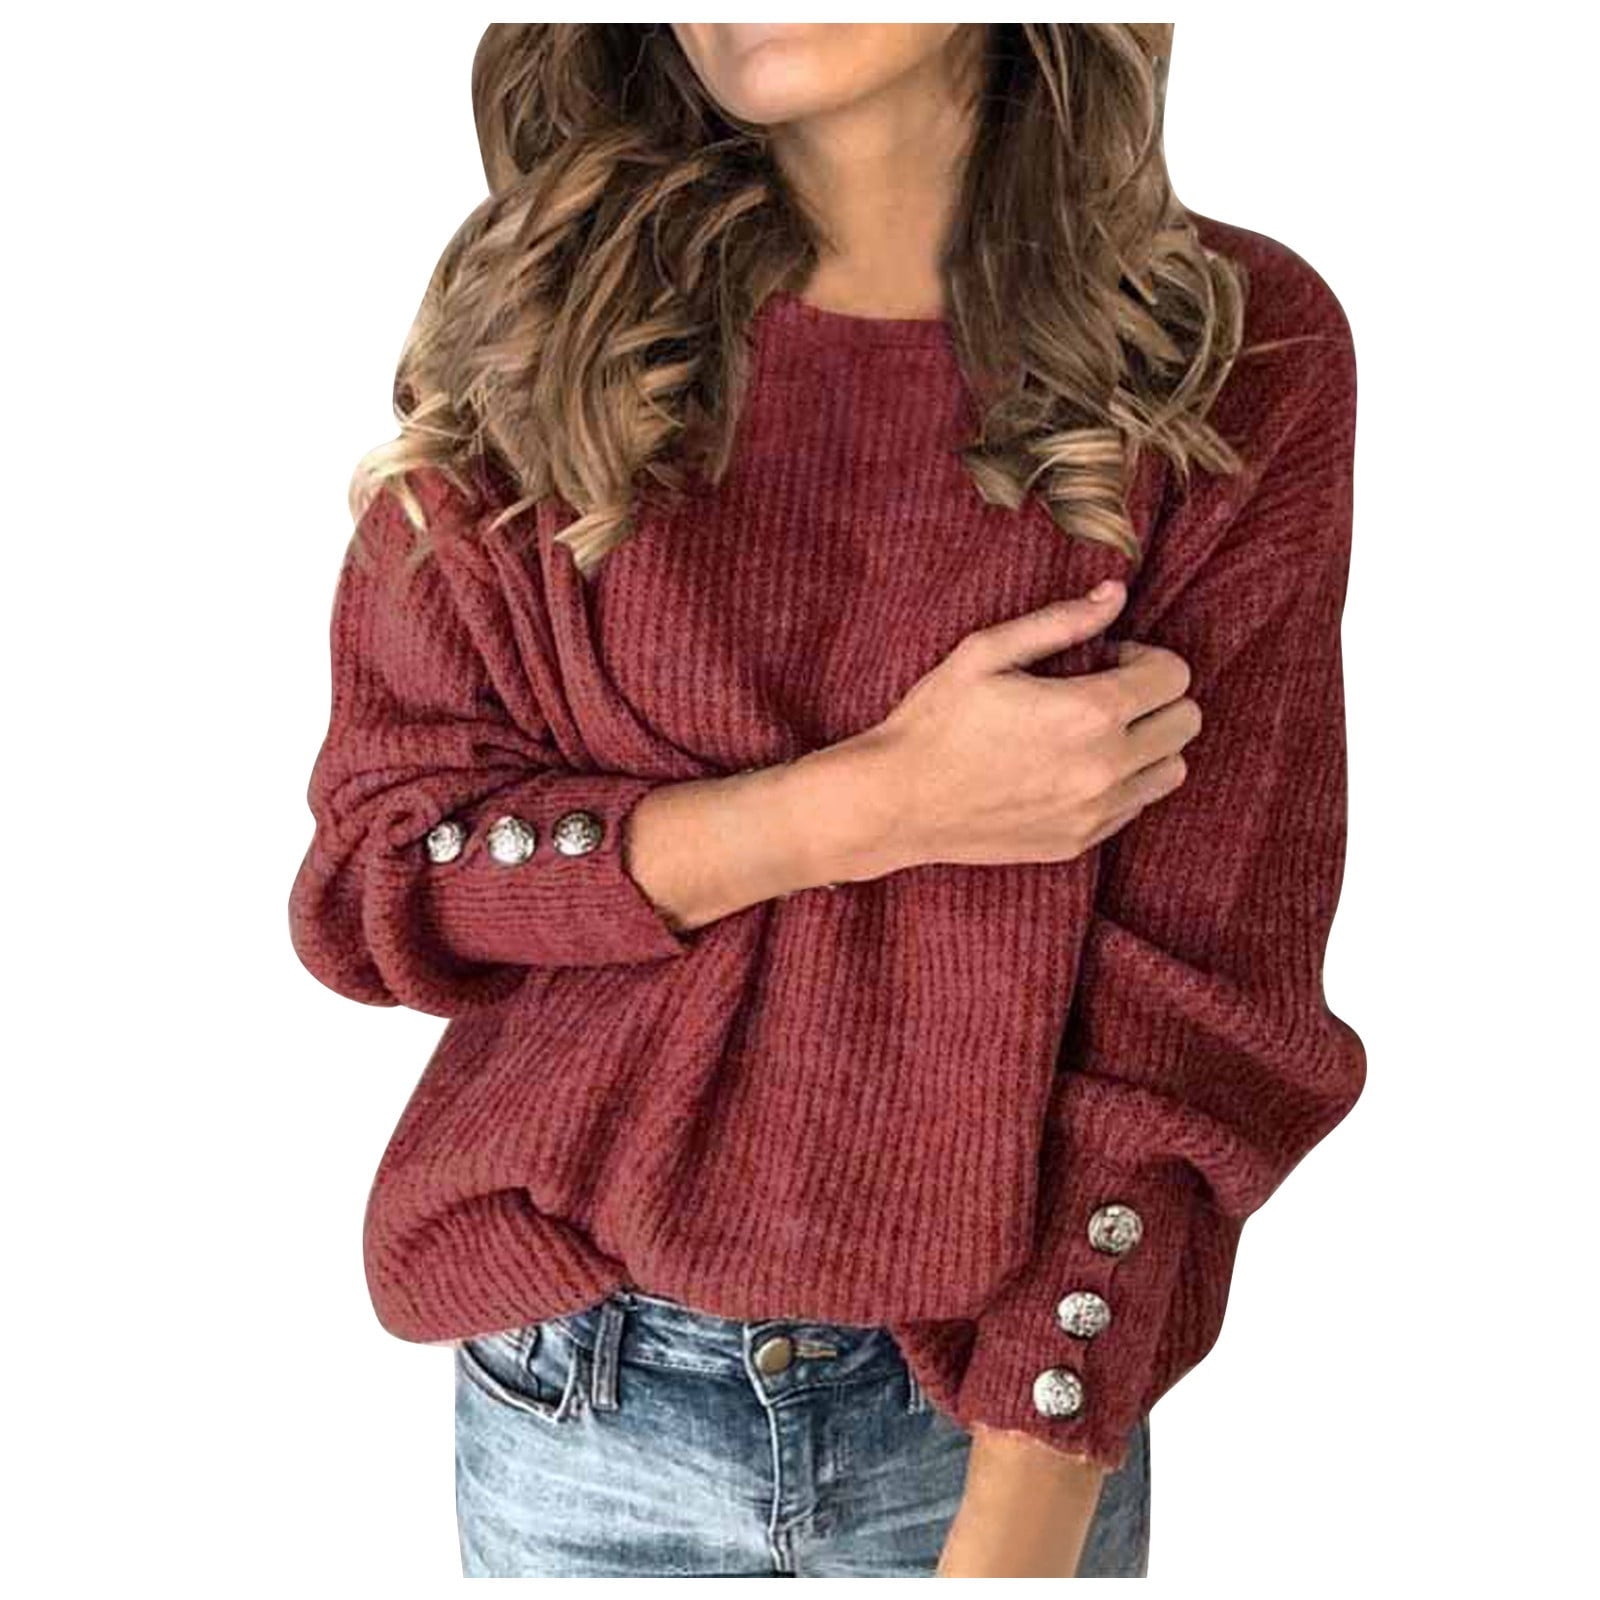 New Womens Ladies  Owl Print Knitted Long Sleeve Jumper Top S M L XL 